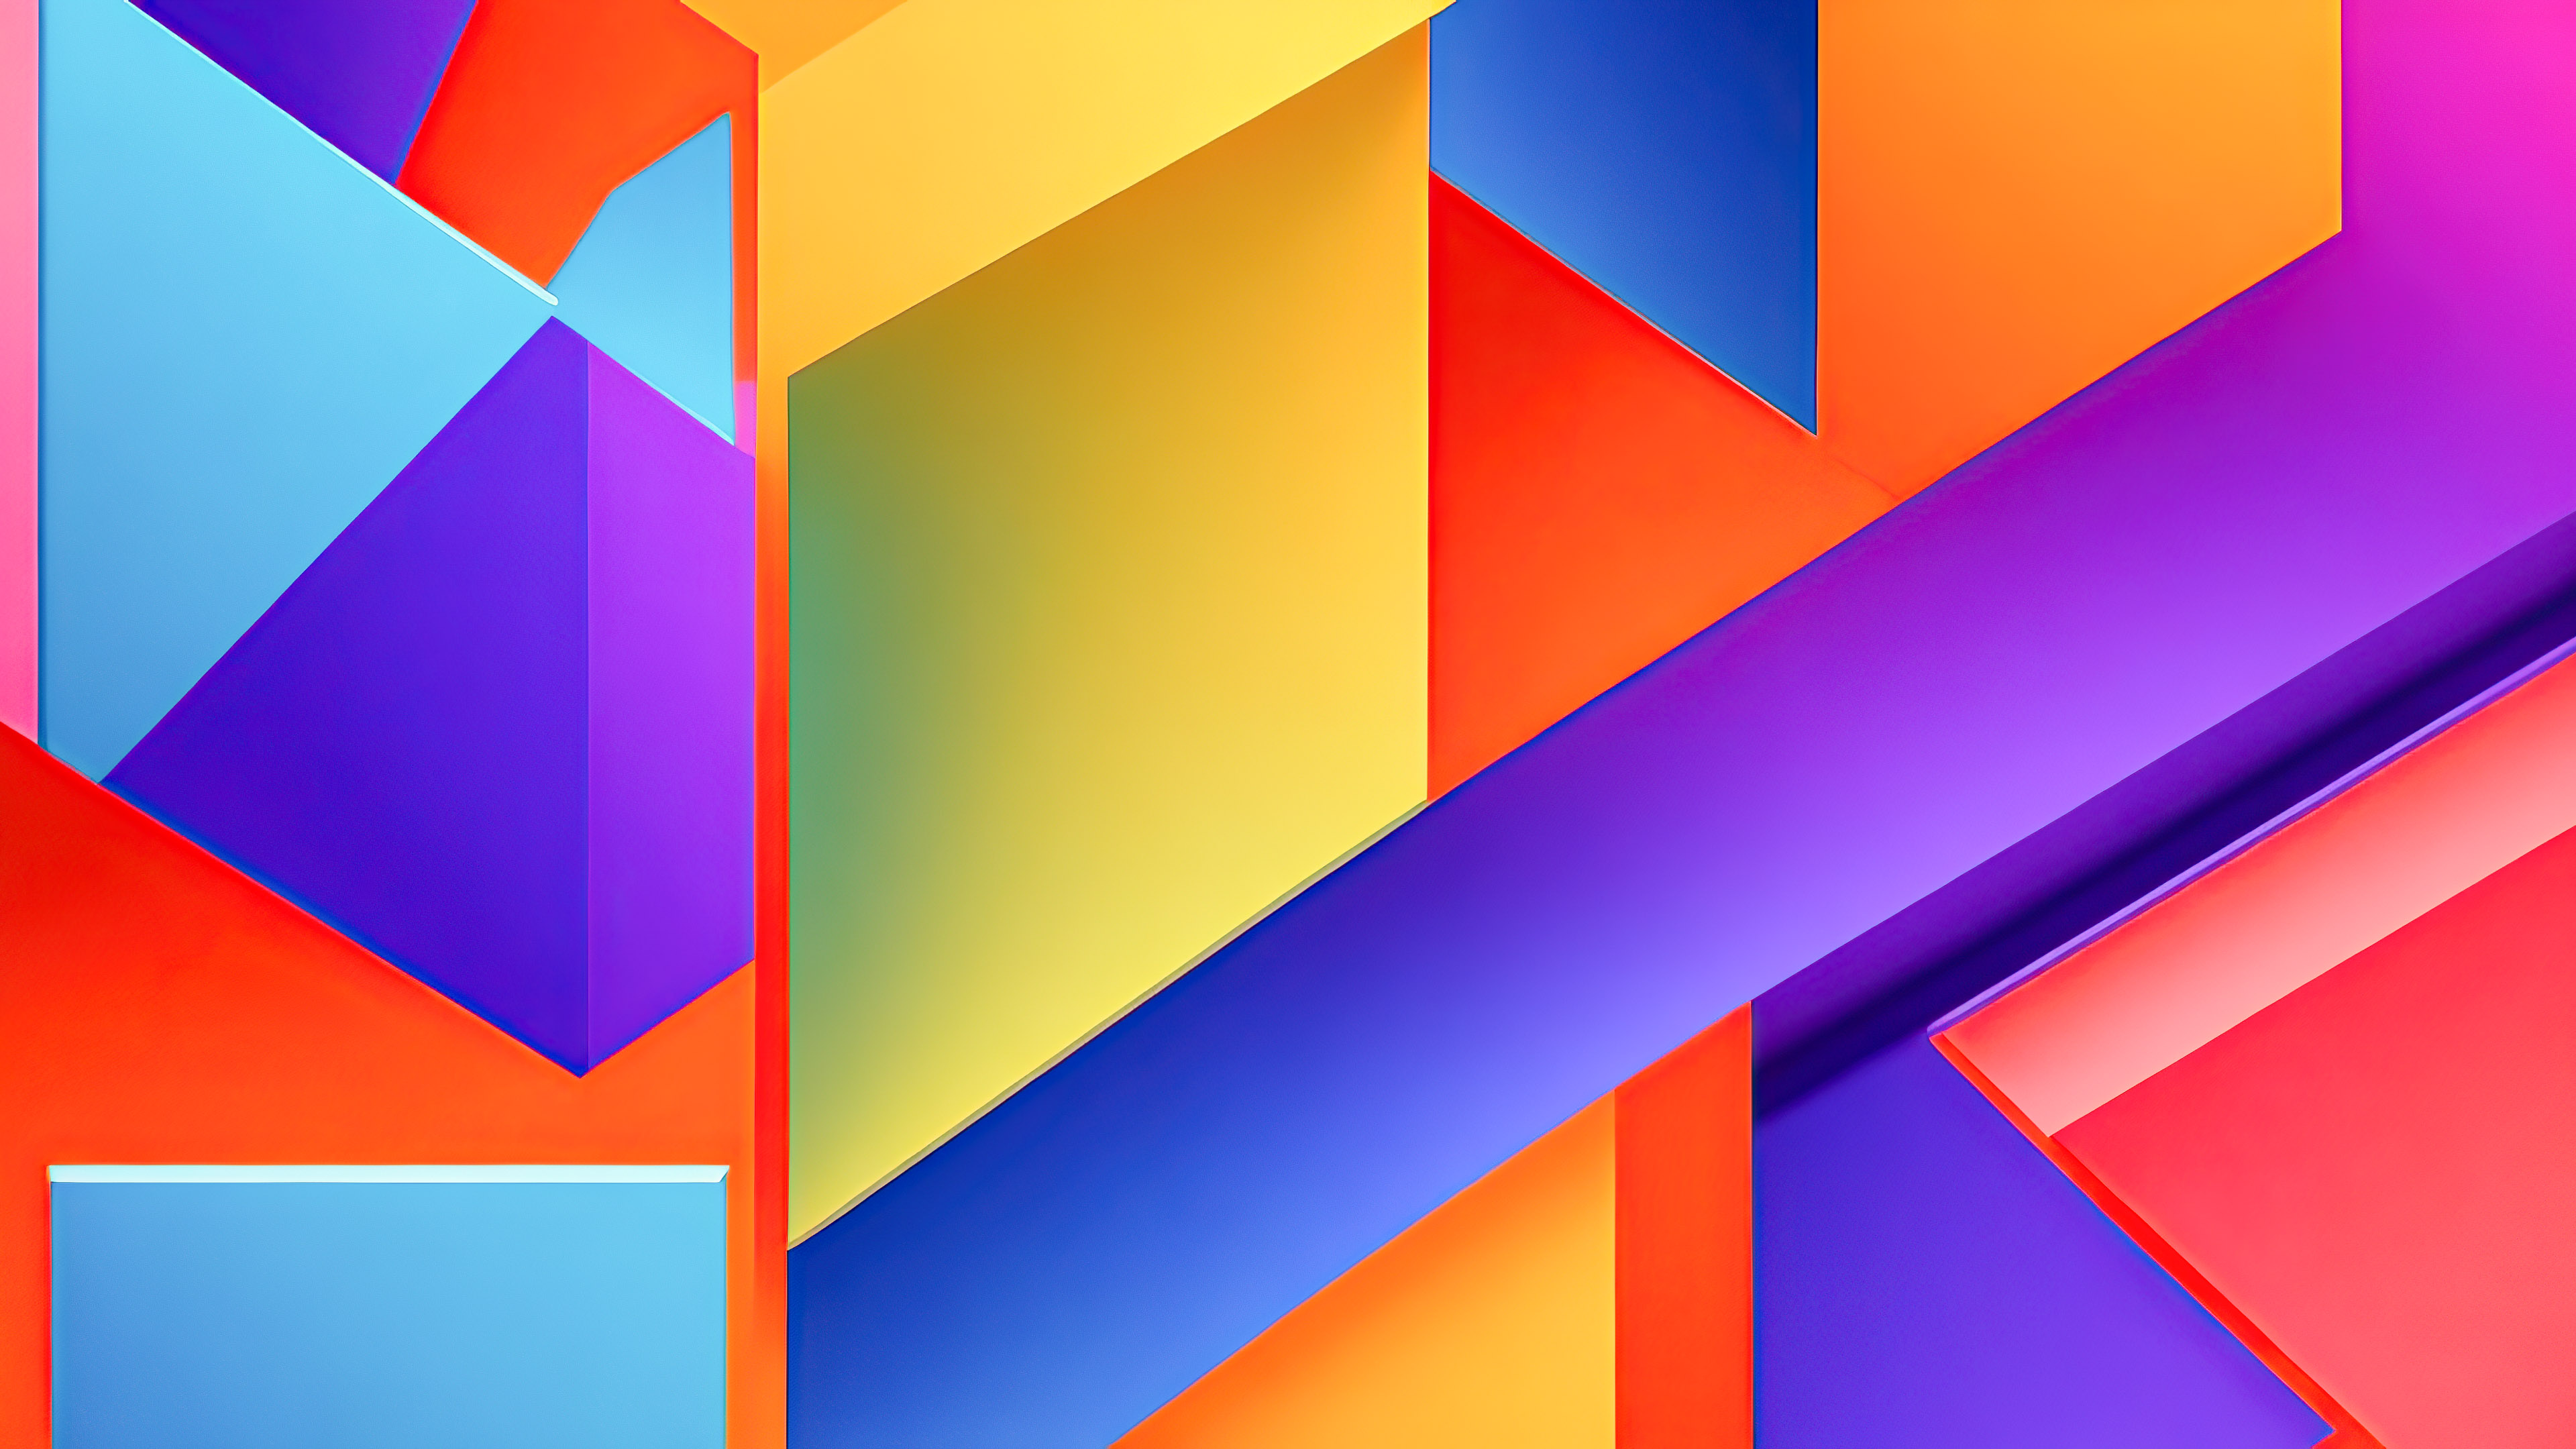 Transform your desktop with abstract desktop wallpaper, showcasing simple colorful geometric shapes on a vibrant background.